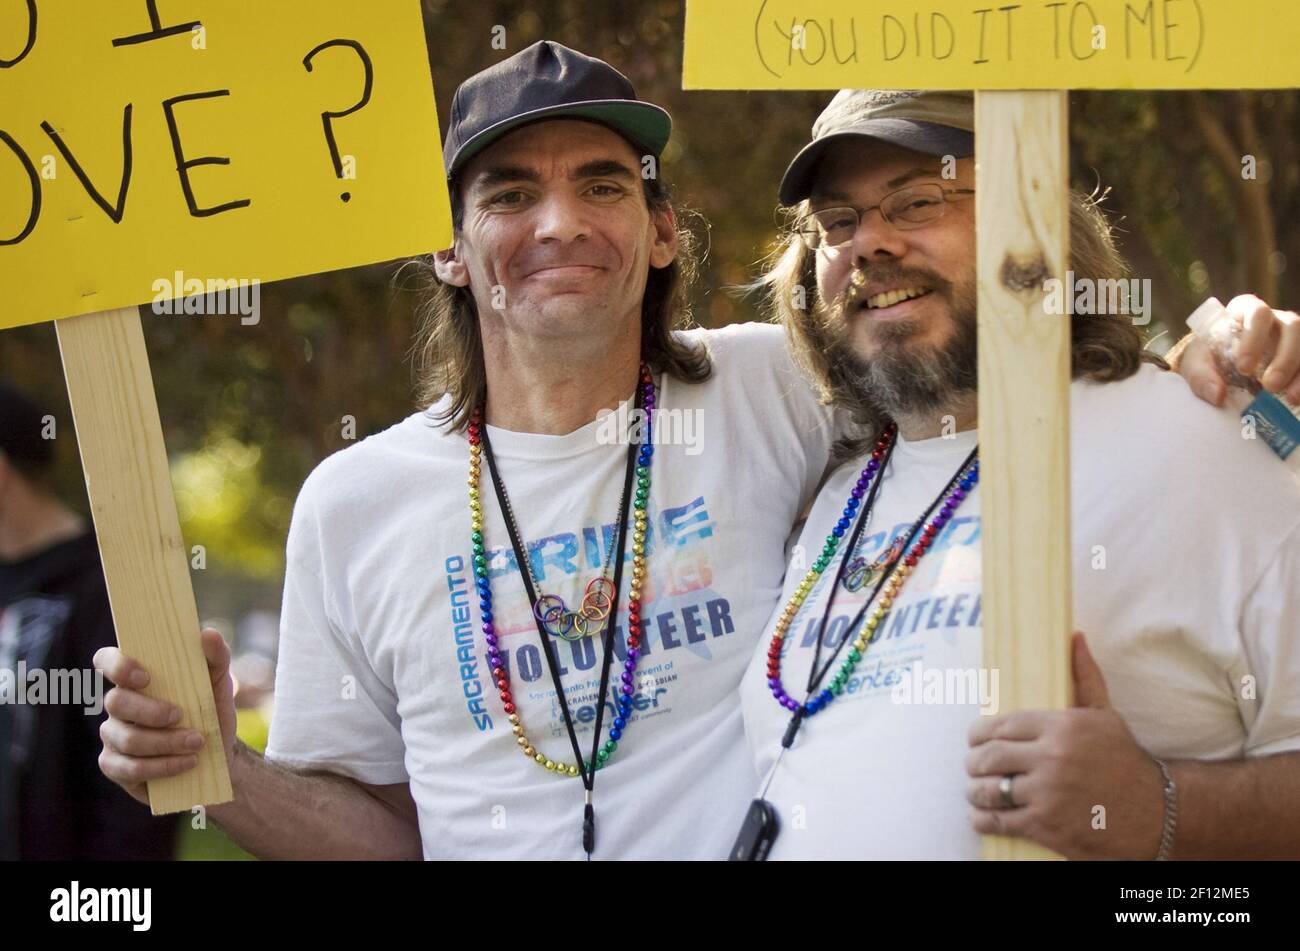 Sean Wheaton, left, and Jeff Wheaton show their solidarity during a gay rights rally protesting the passage of California's Proposition 8 on Saturday, November 13, 2008, in Sacramento, California. After 12 years together the couple was married on August 12, 2008. 'It took us 12 years to get married and if it takes another 12 everyone else will have the same rights,' Sean said. (Photo by Autumn Cruz/Sacramento Bee/MCT/Sipa USA) Stock Photo